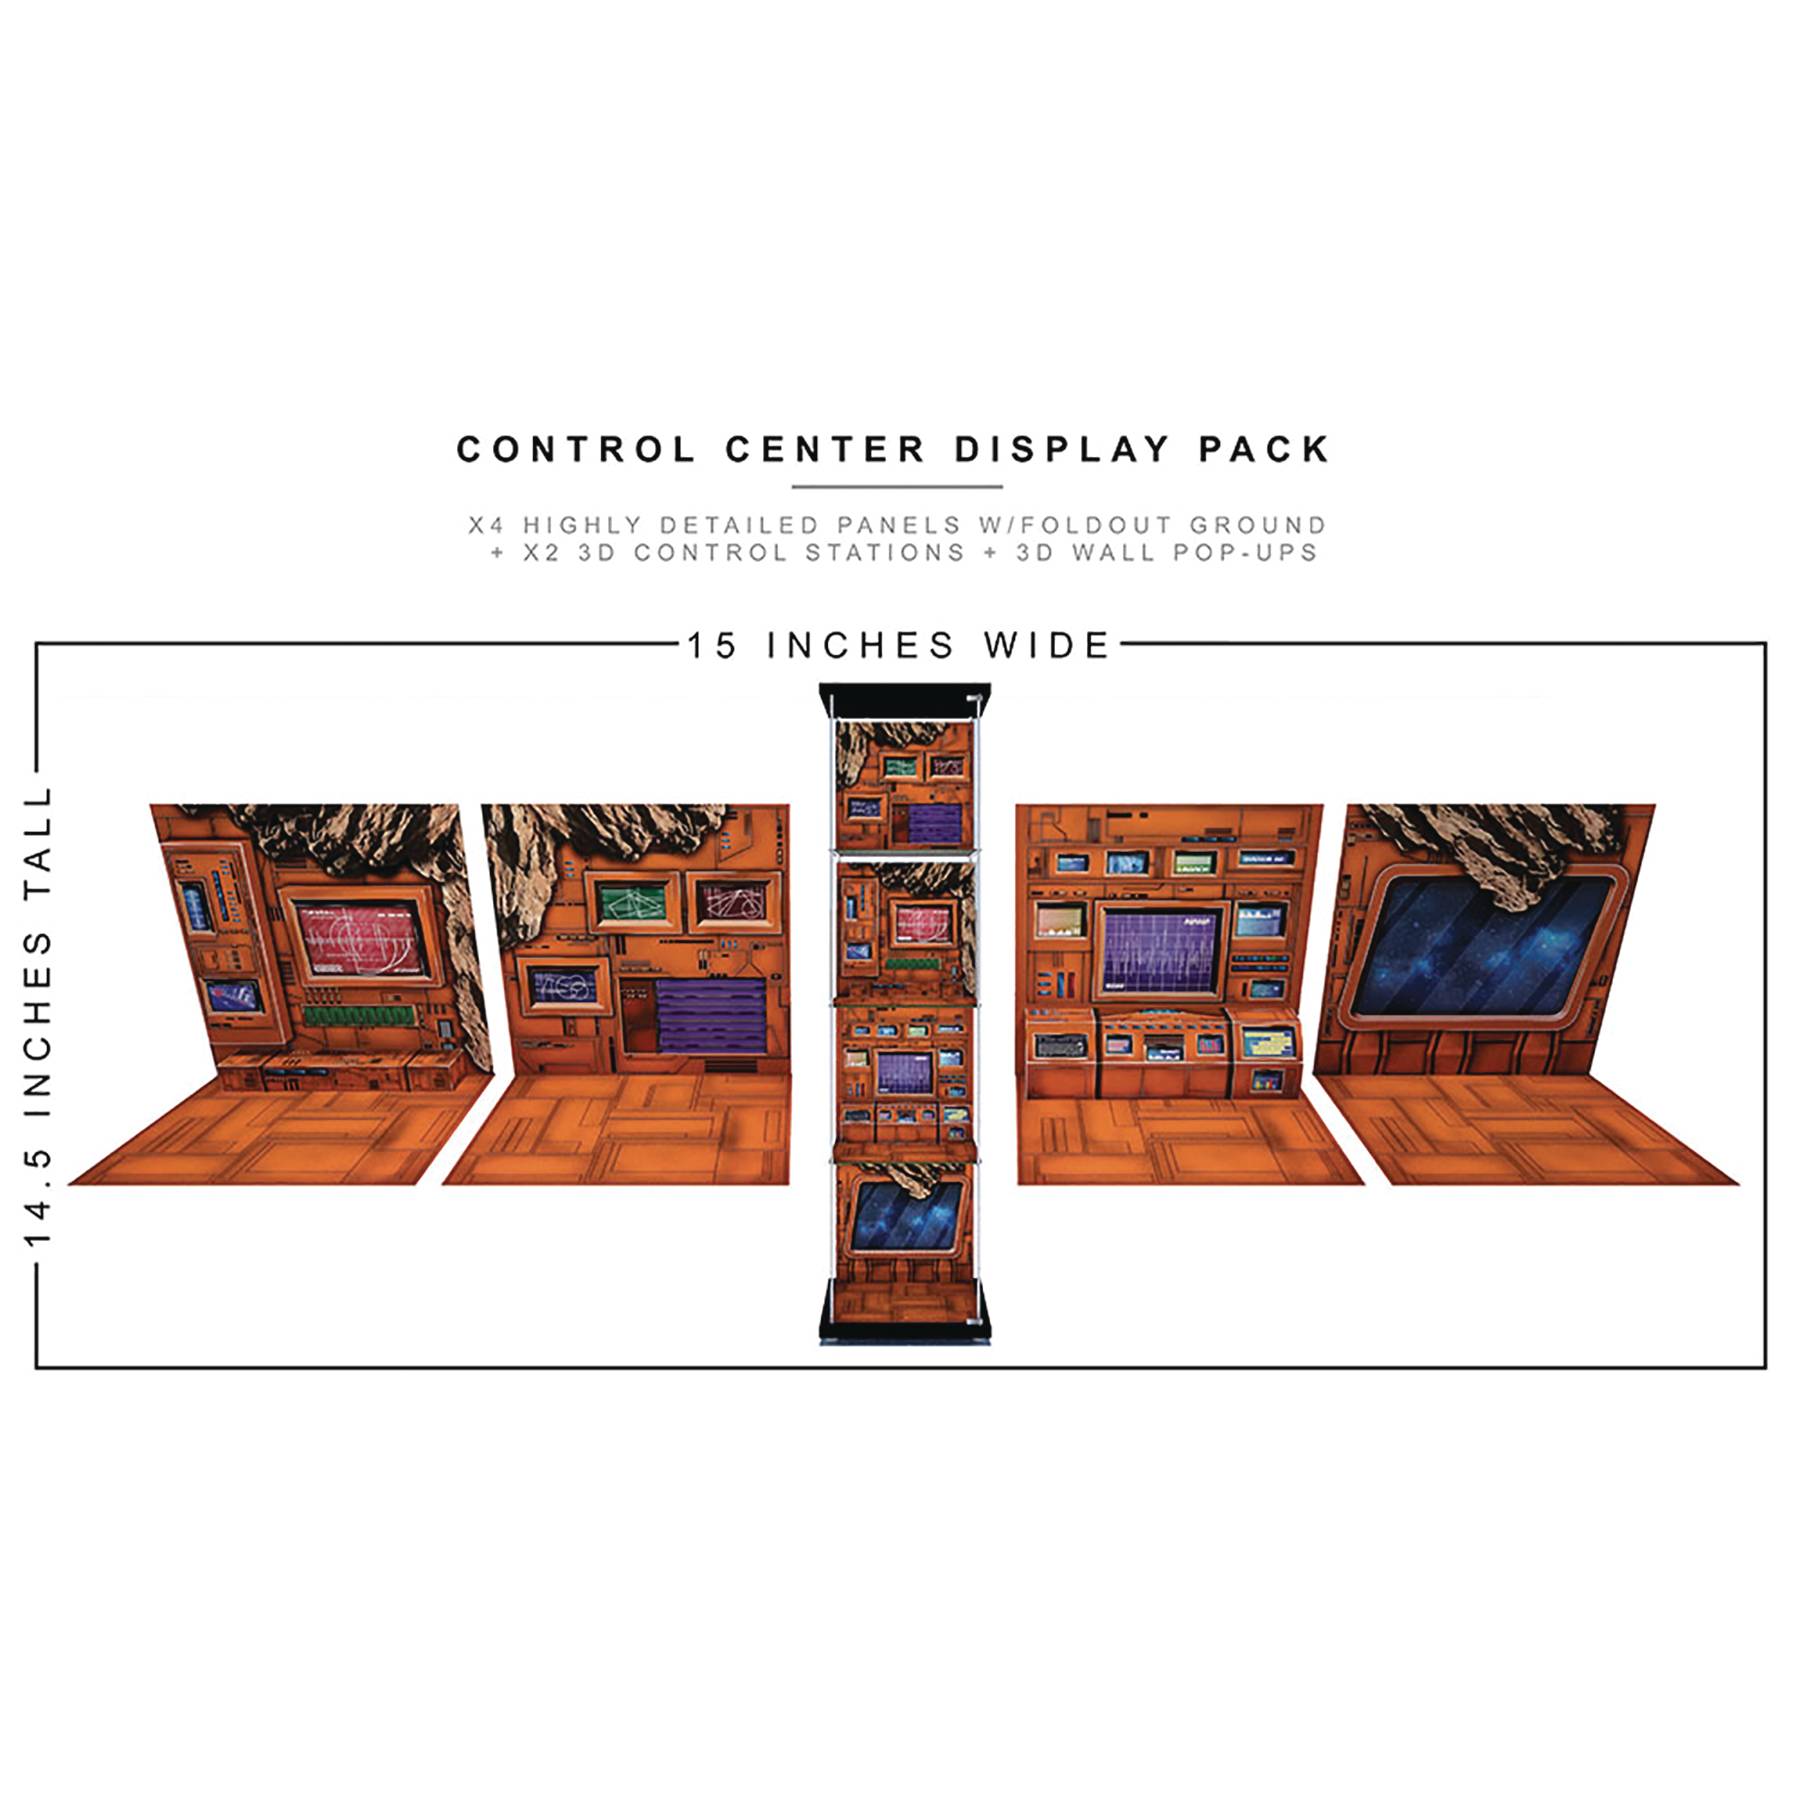 EXTREME SETS STREET CONTROL CENTER 1/12 SCALE DISPLAY PACK (